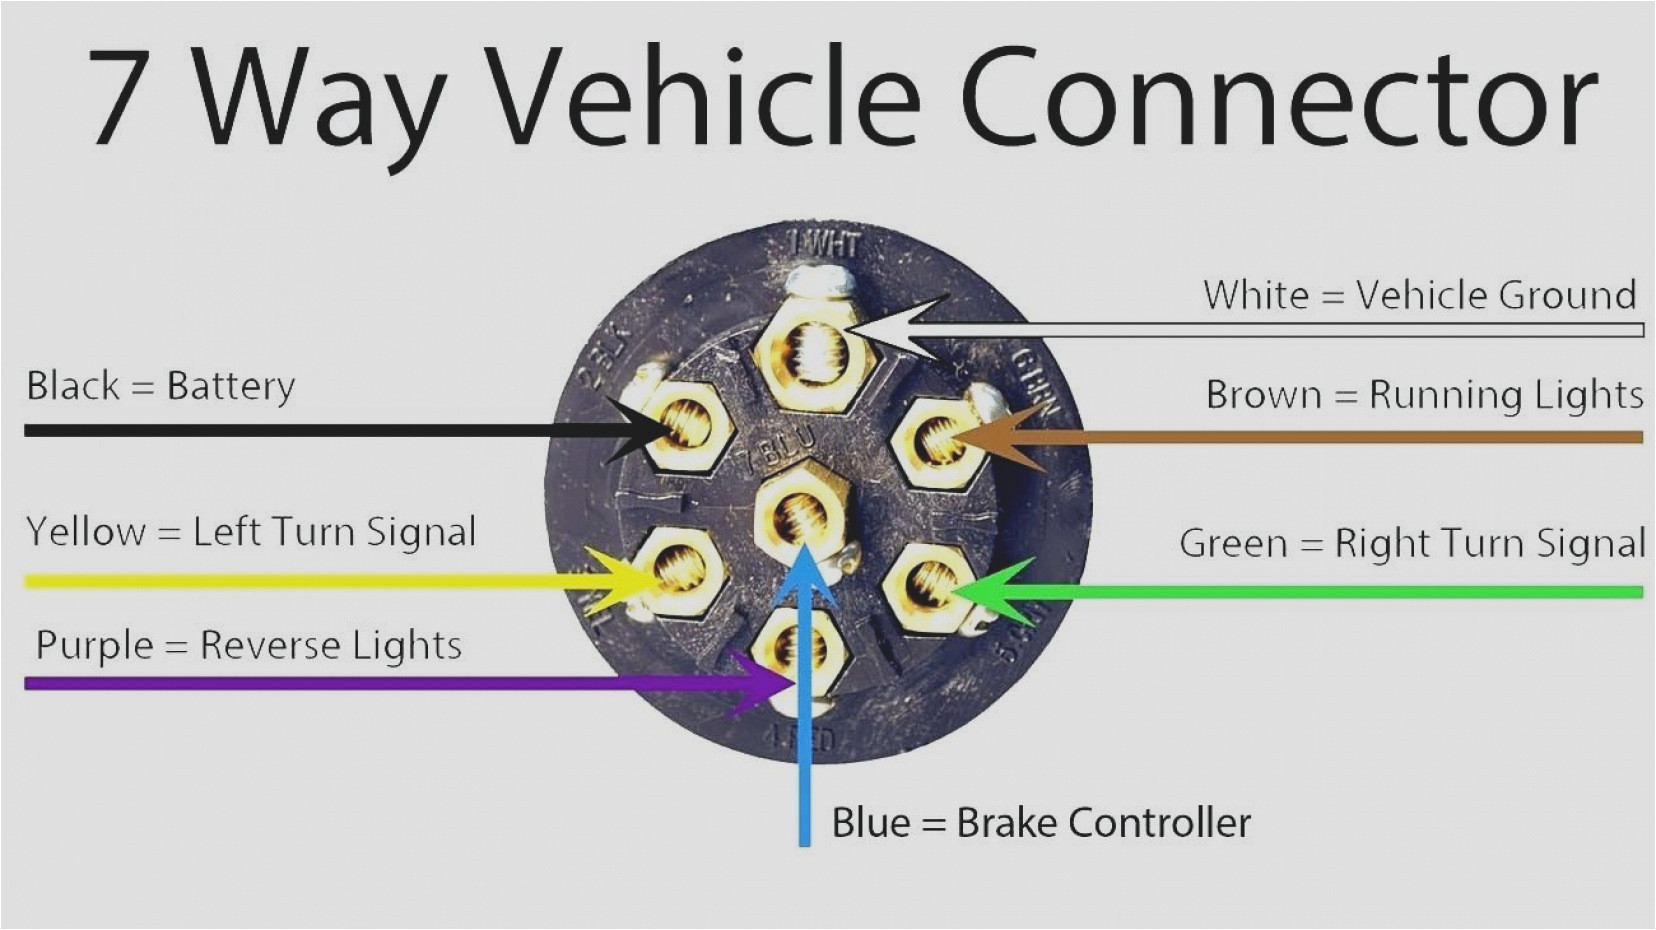 way trailer plug wiring diagram new rv blade with for natebird me of marvelous pin harness picture jpg